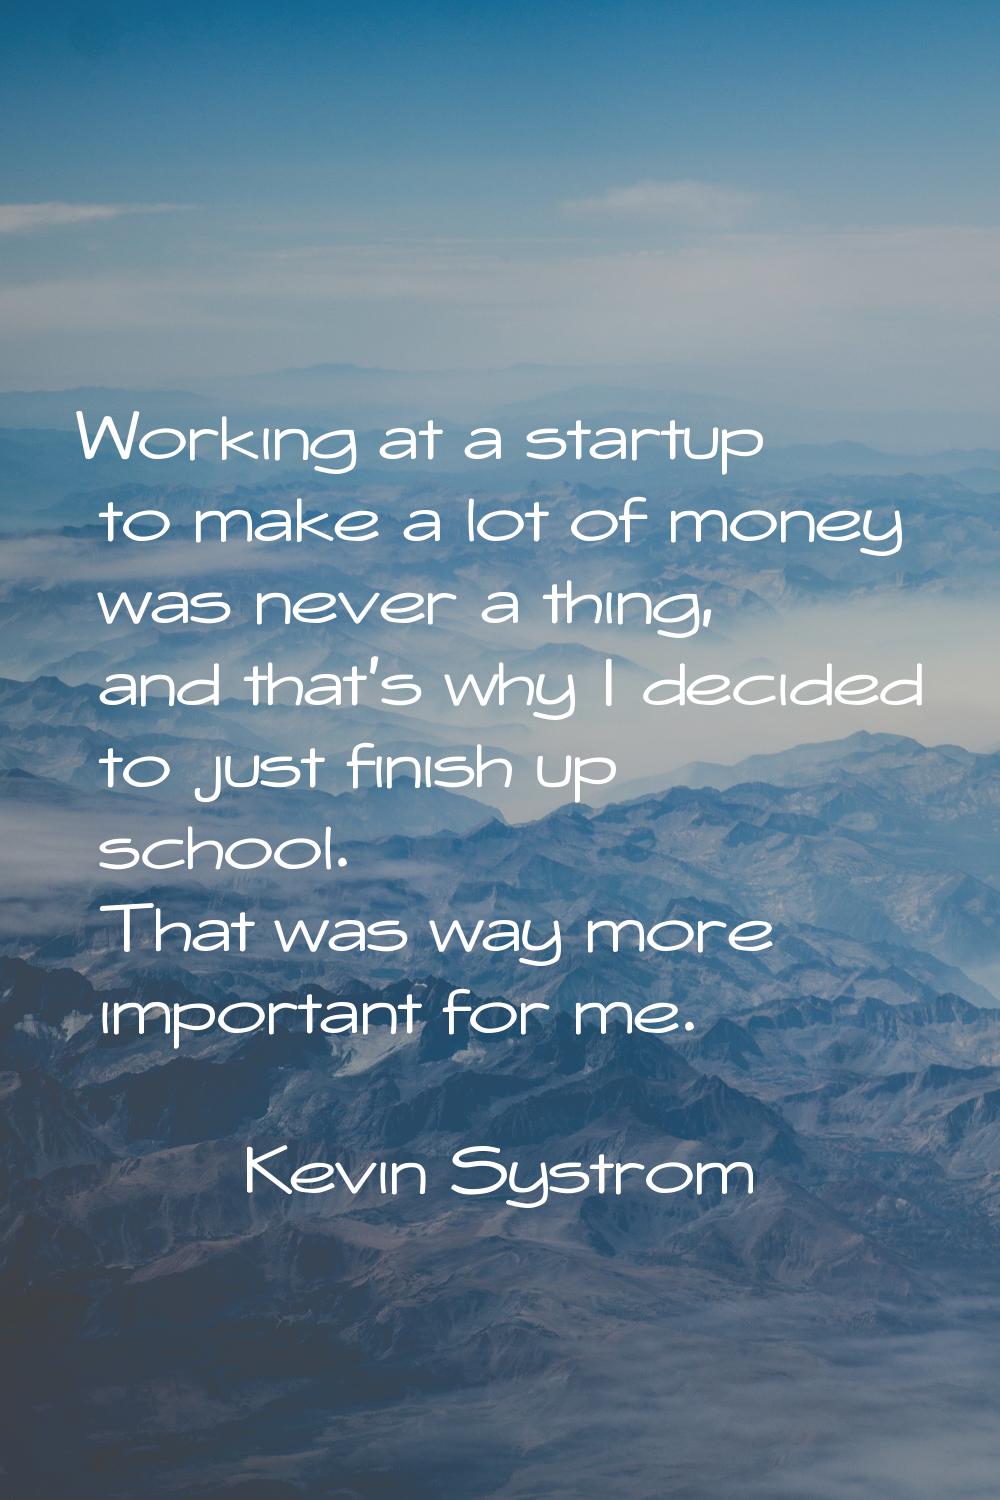 Working at a startup to make a lot of money was never a thing, and that's why I decided to just fin